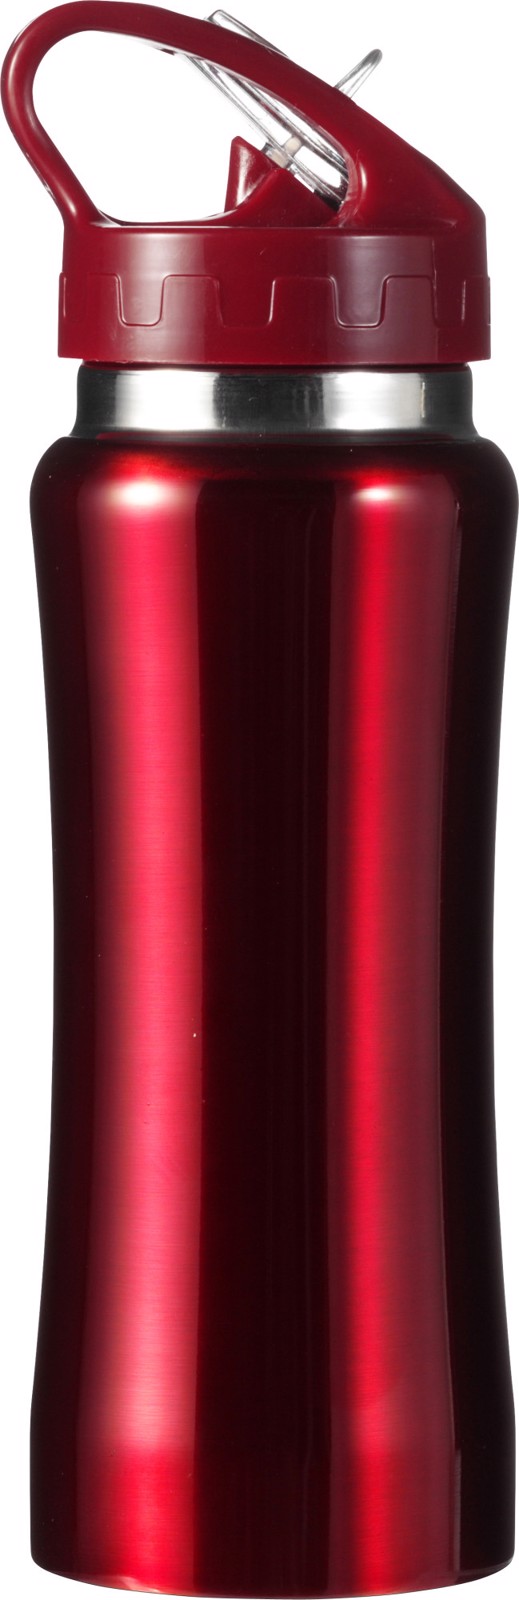 Stainless steel bottle - Red